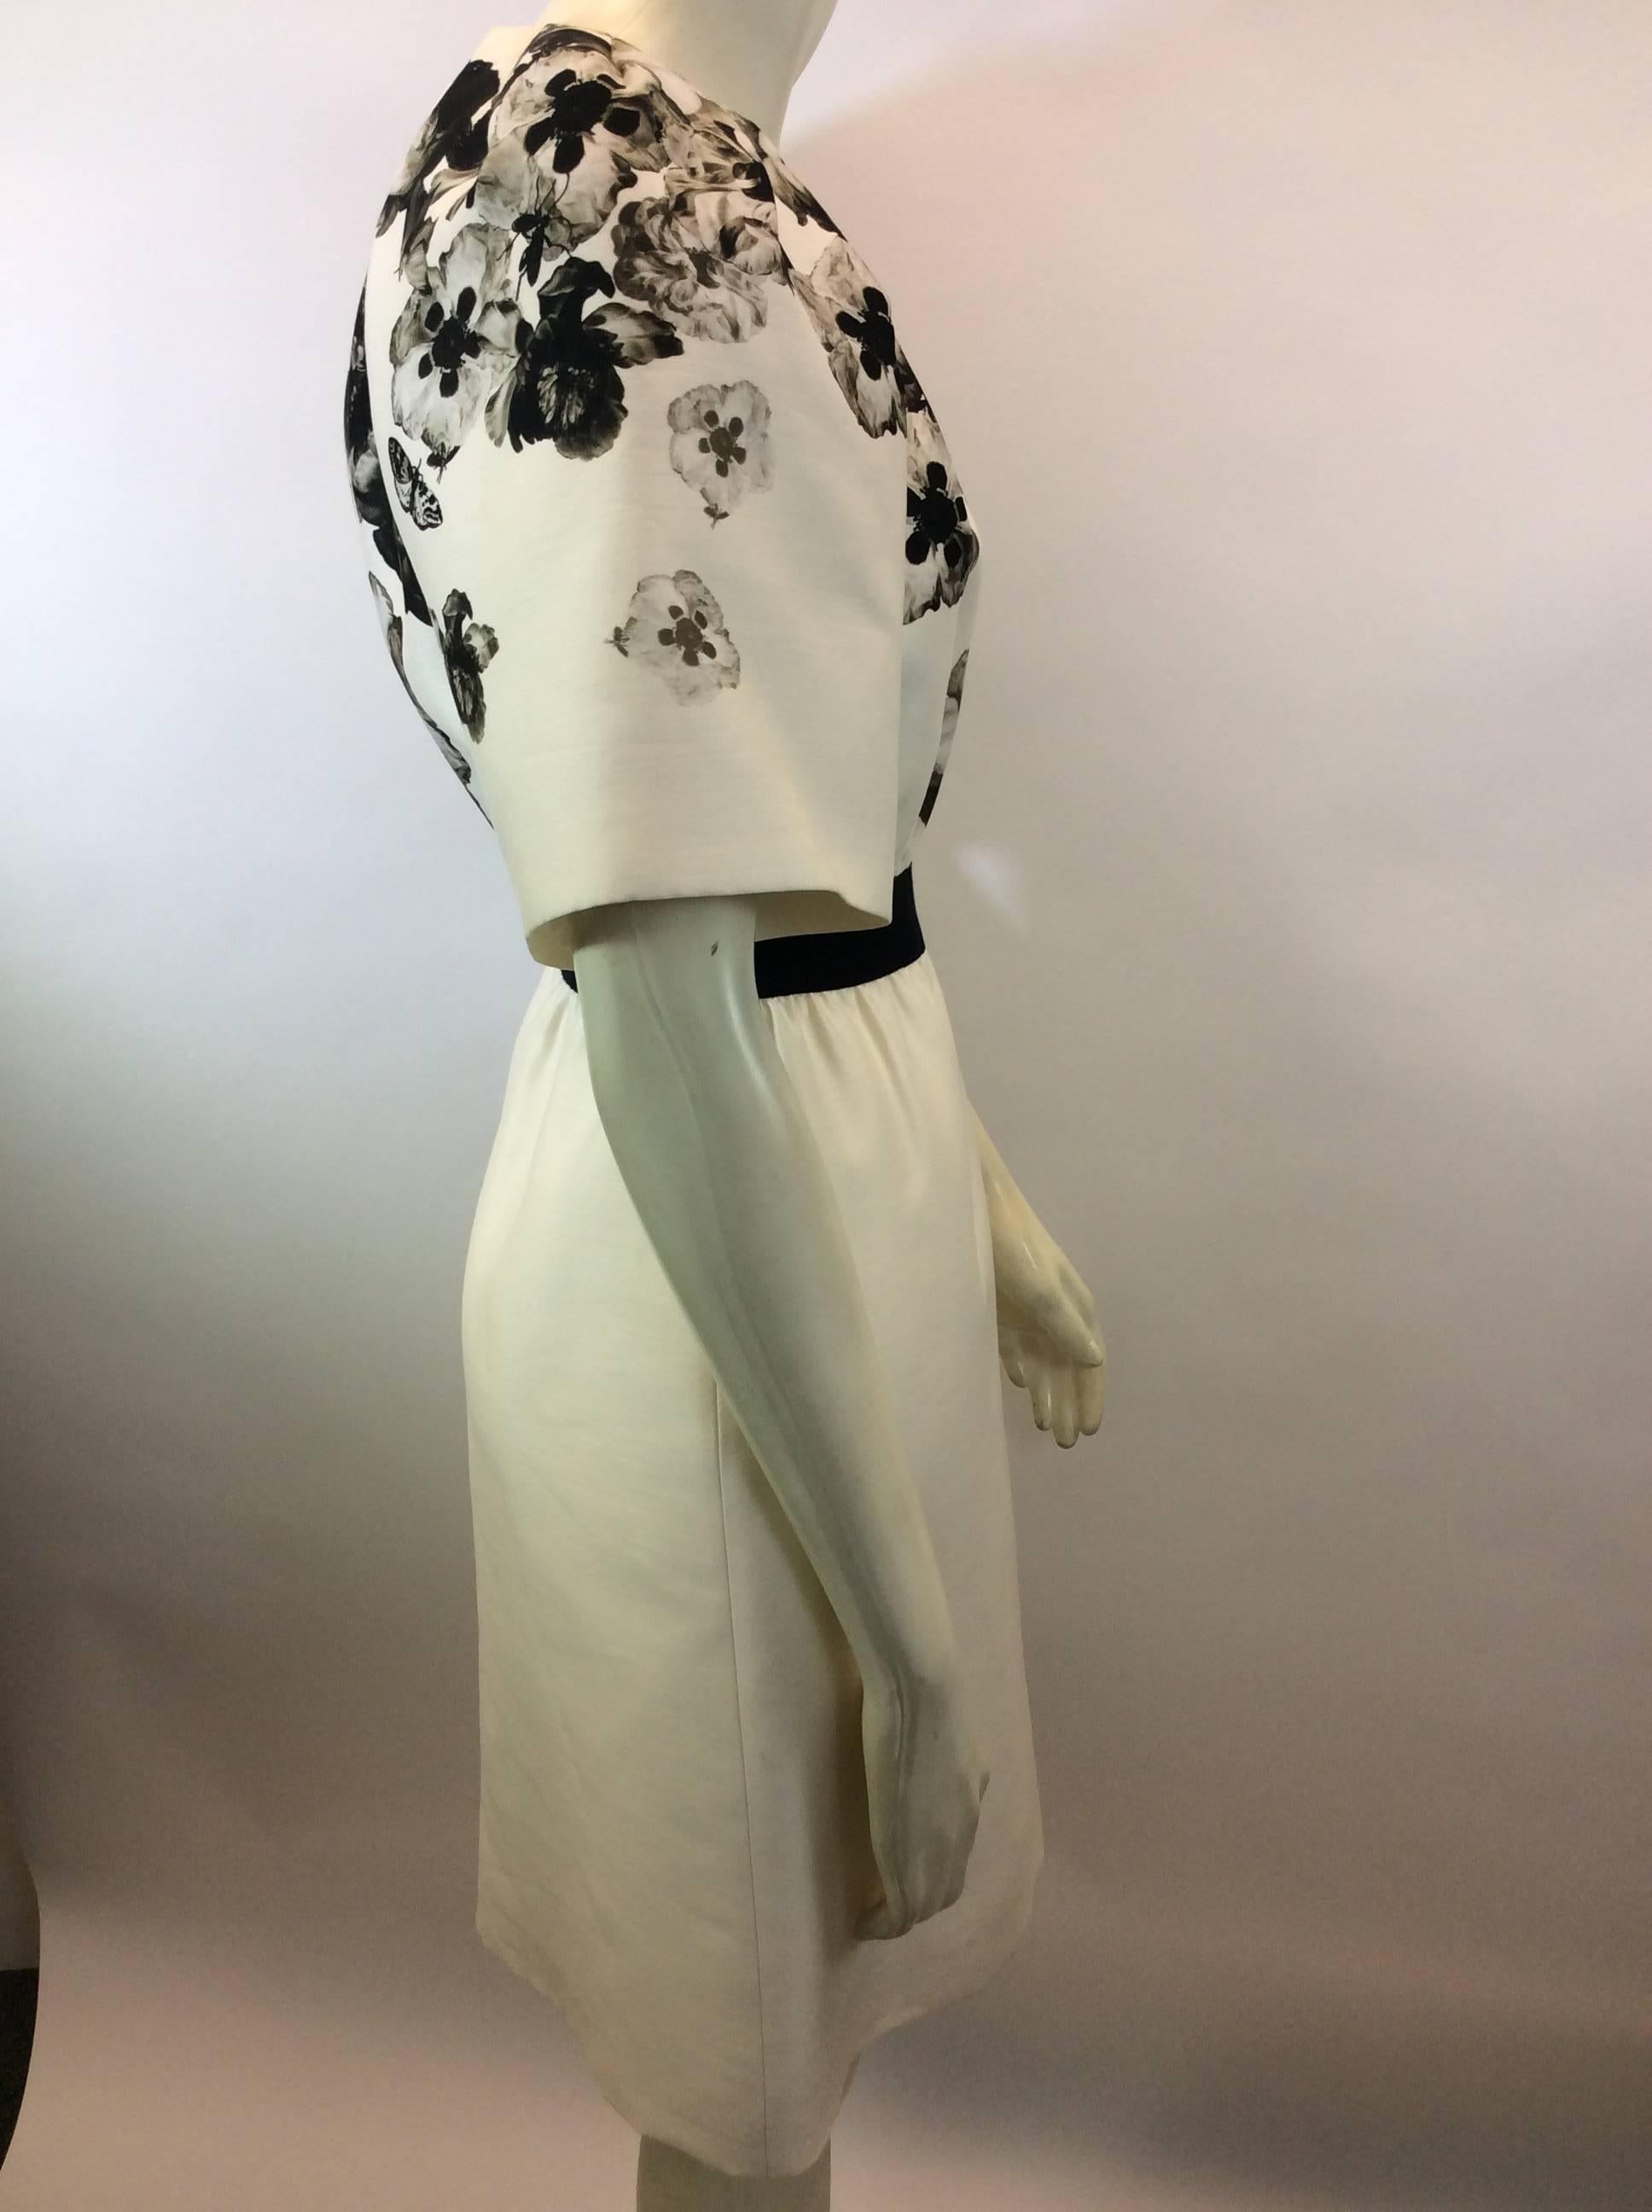 Giambattista Valli Black and White Print Silk Dress In Excellent Condition For Sale In Narberth, PA